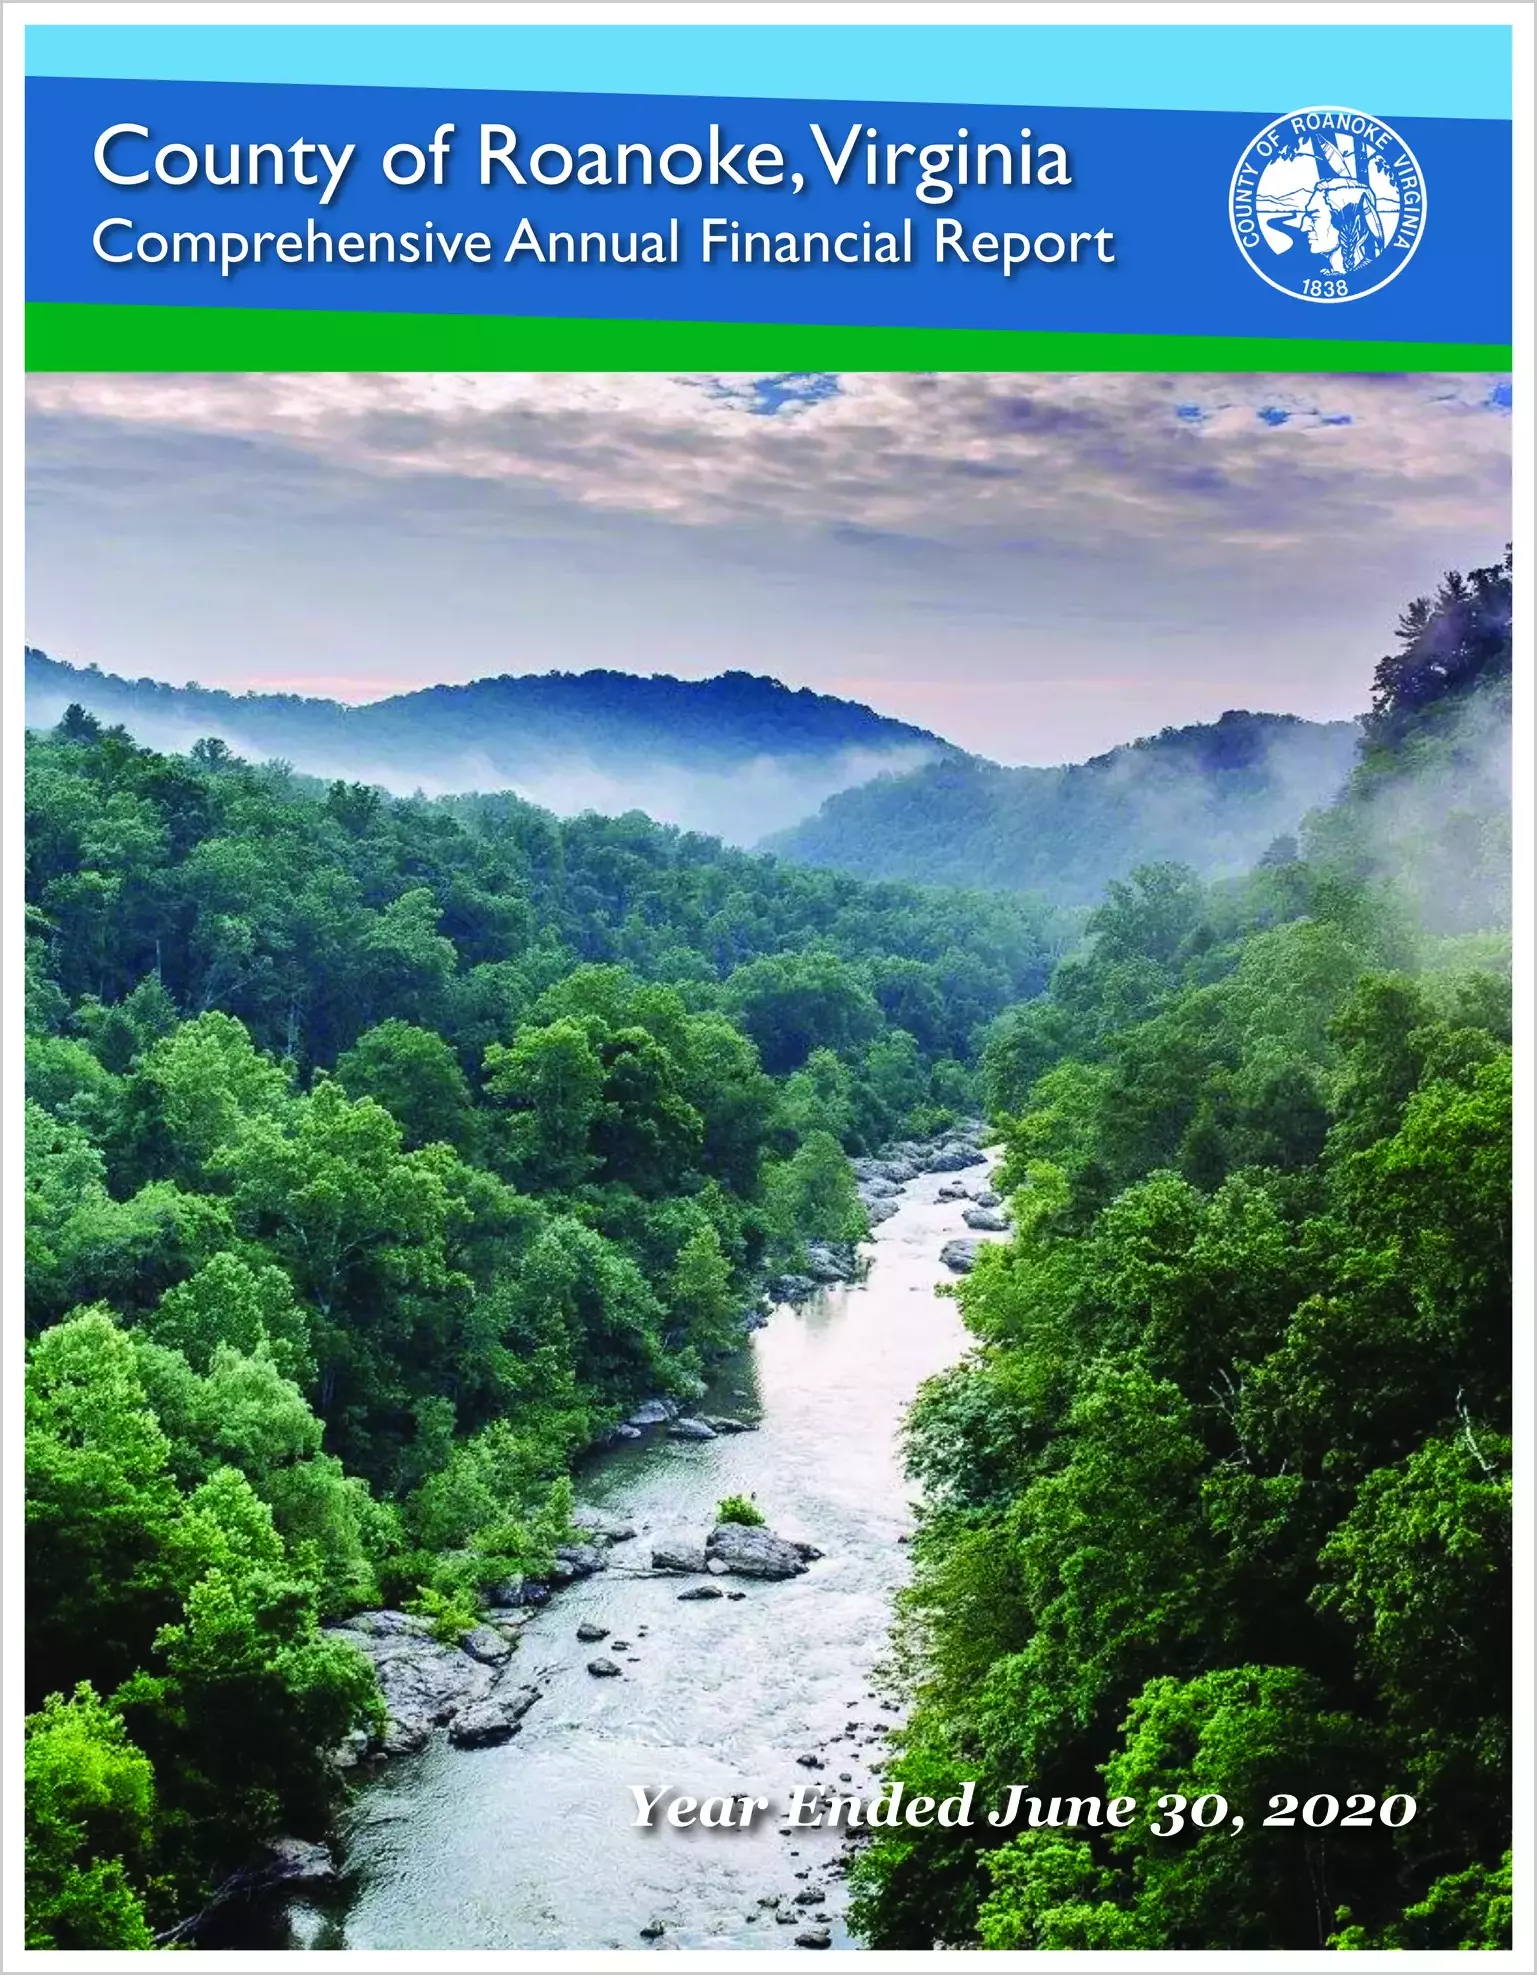 2020 Annual Financial Report for County of Roanoke